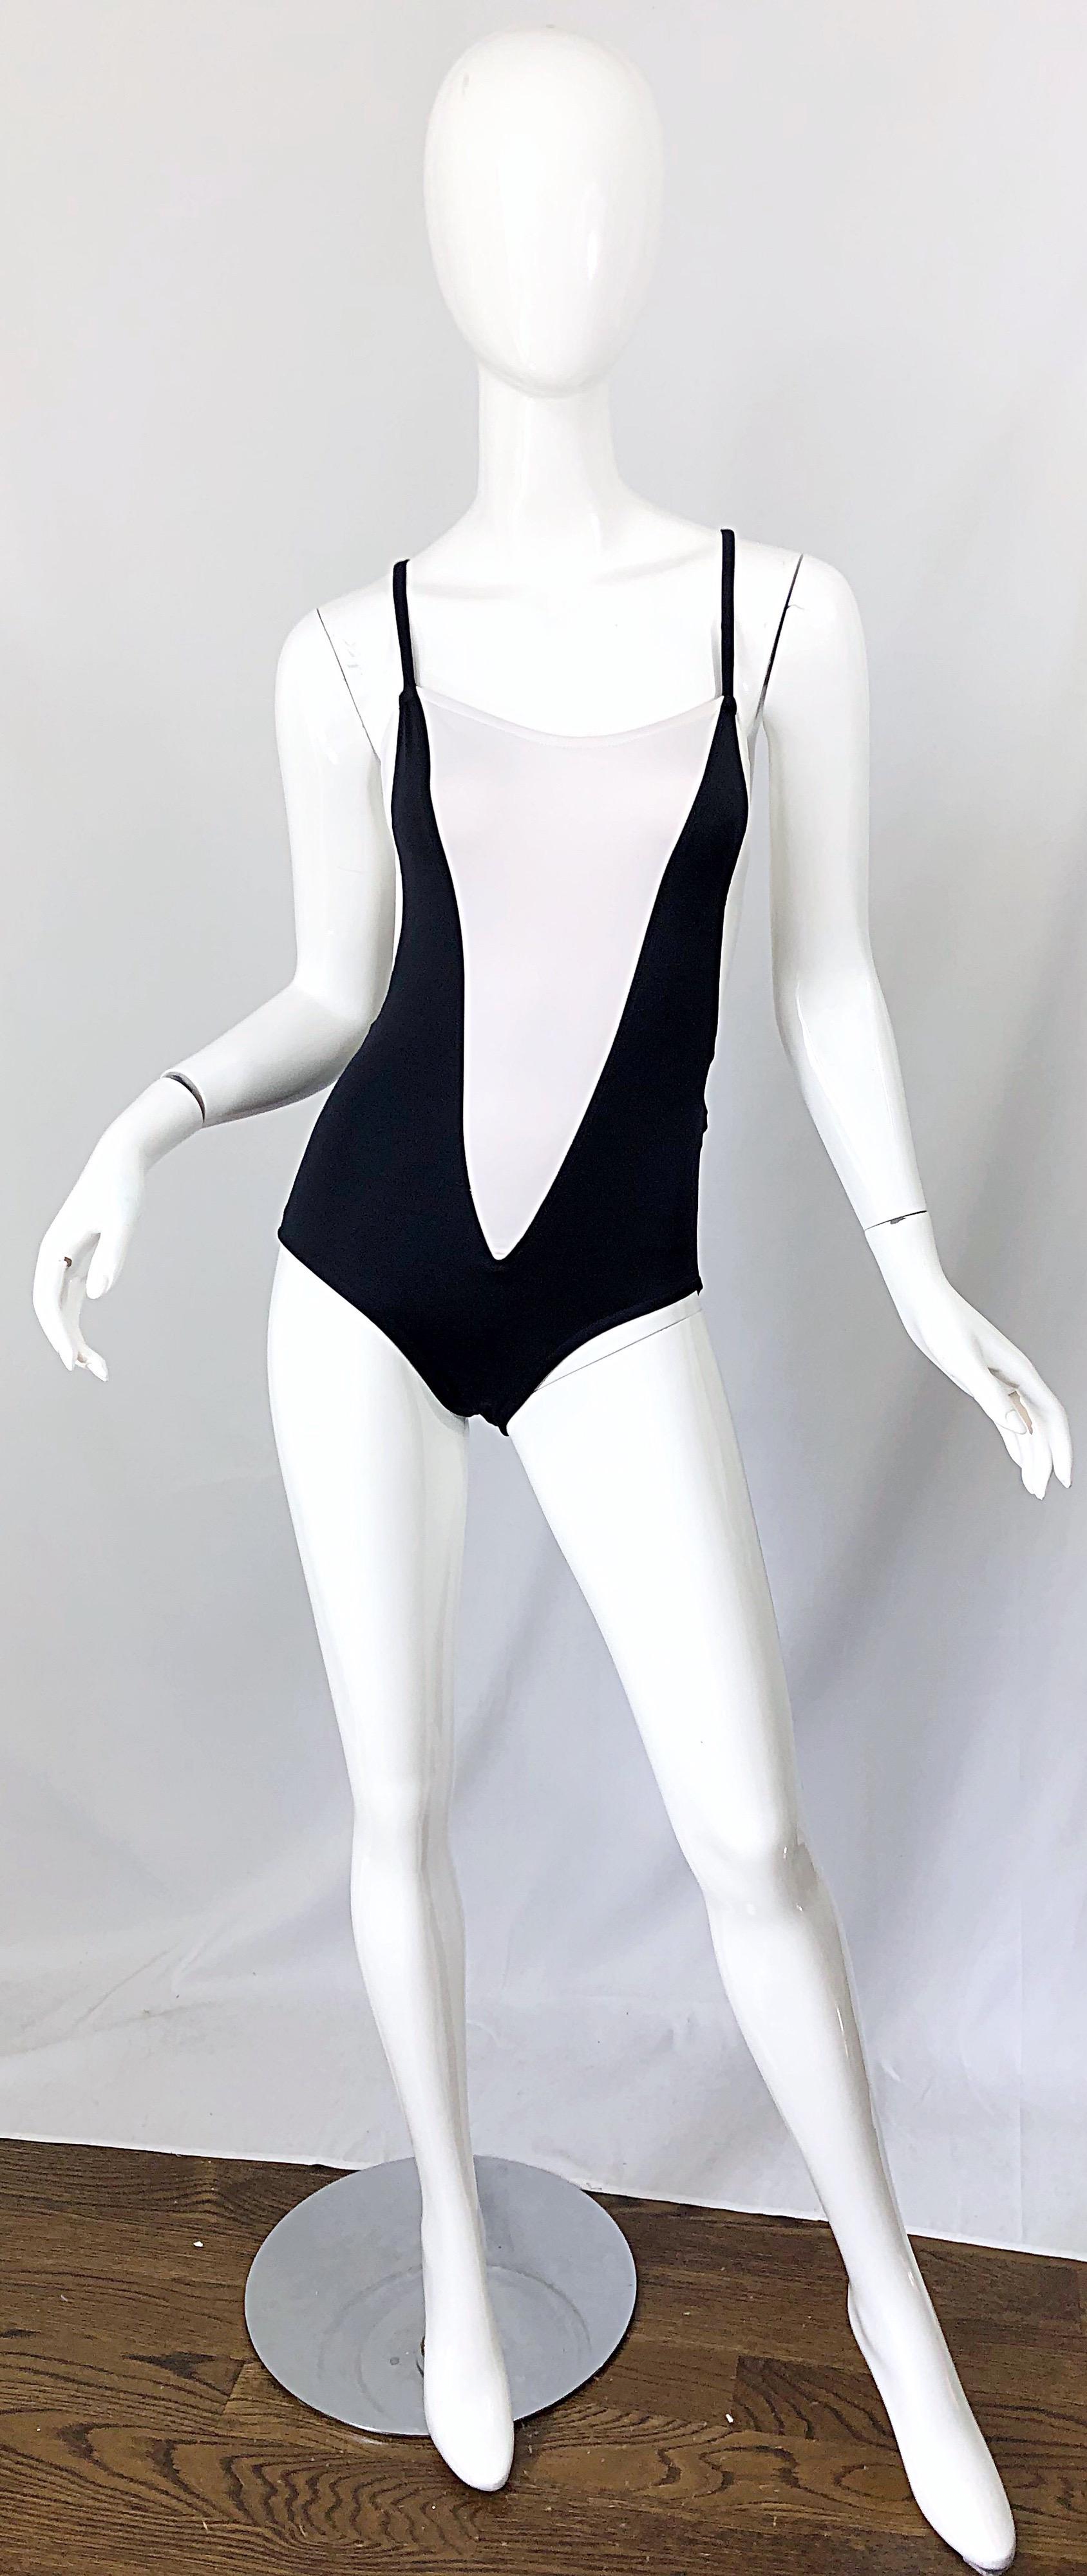 Amazing never worn with tags still attached vintage 1980s BILL BLASS trompe l'oeil black and white one piece racerback swimsuit or bodysuit! Looks like a plunging swimsuit with a black and white print. Racerback style offers plenty of support. Great